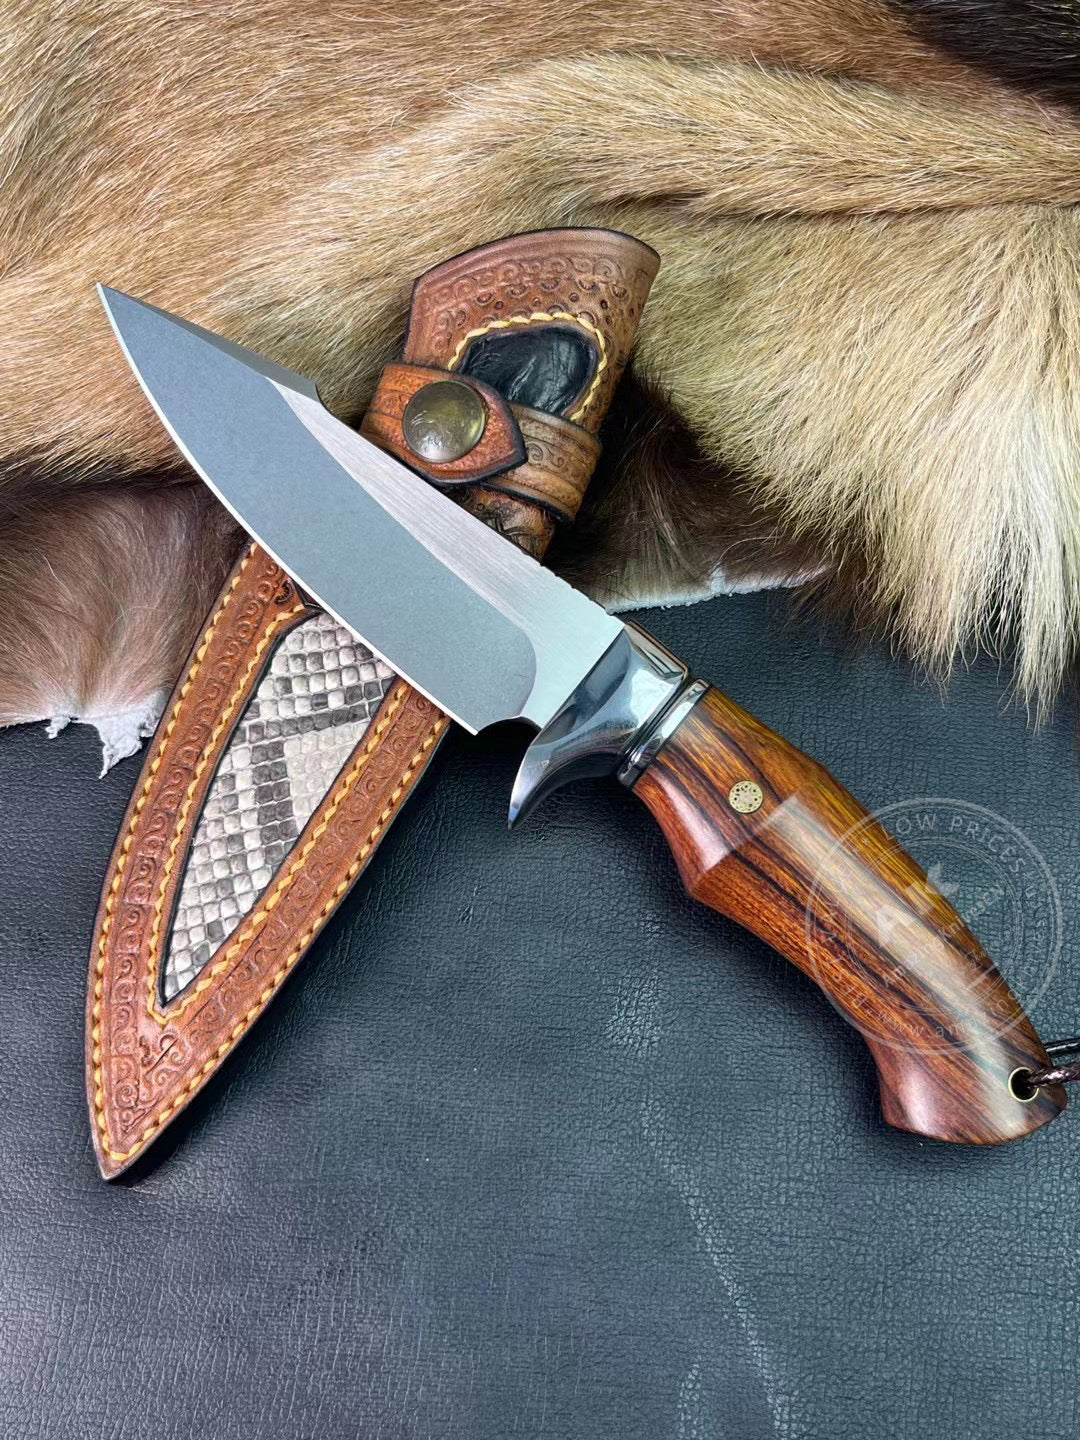 Premium M390 Steel Blade Bowie Knife Fixed Blade Tactical Knife Desert Ironwood with Sheath - AK-HT0644